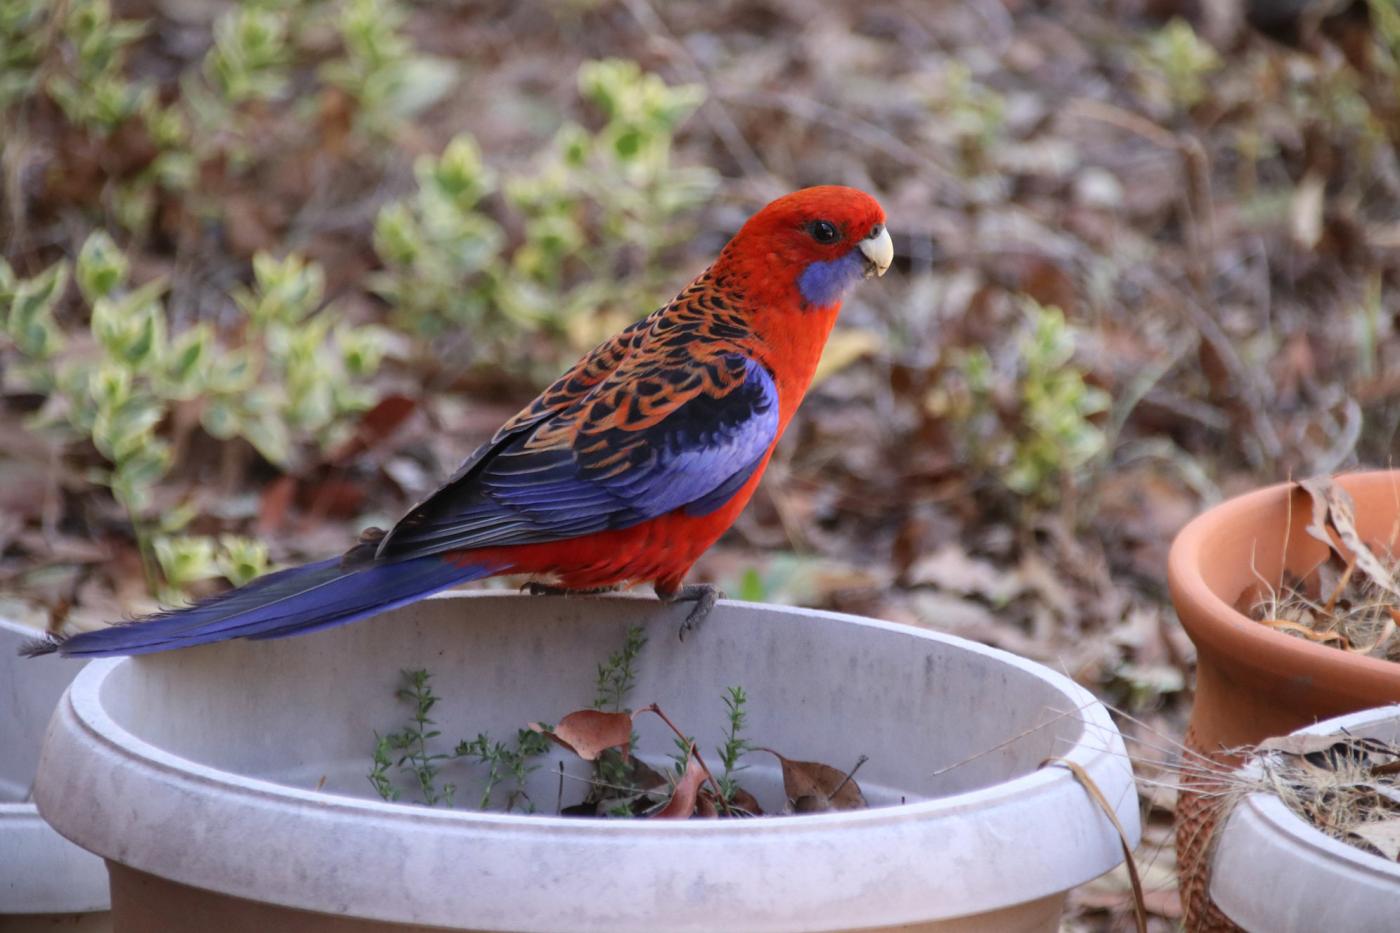 Eastern Rosella's call this home